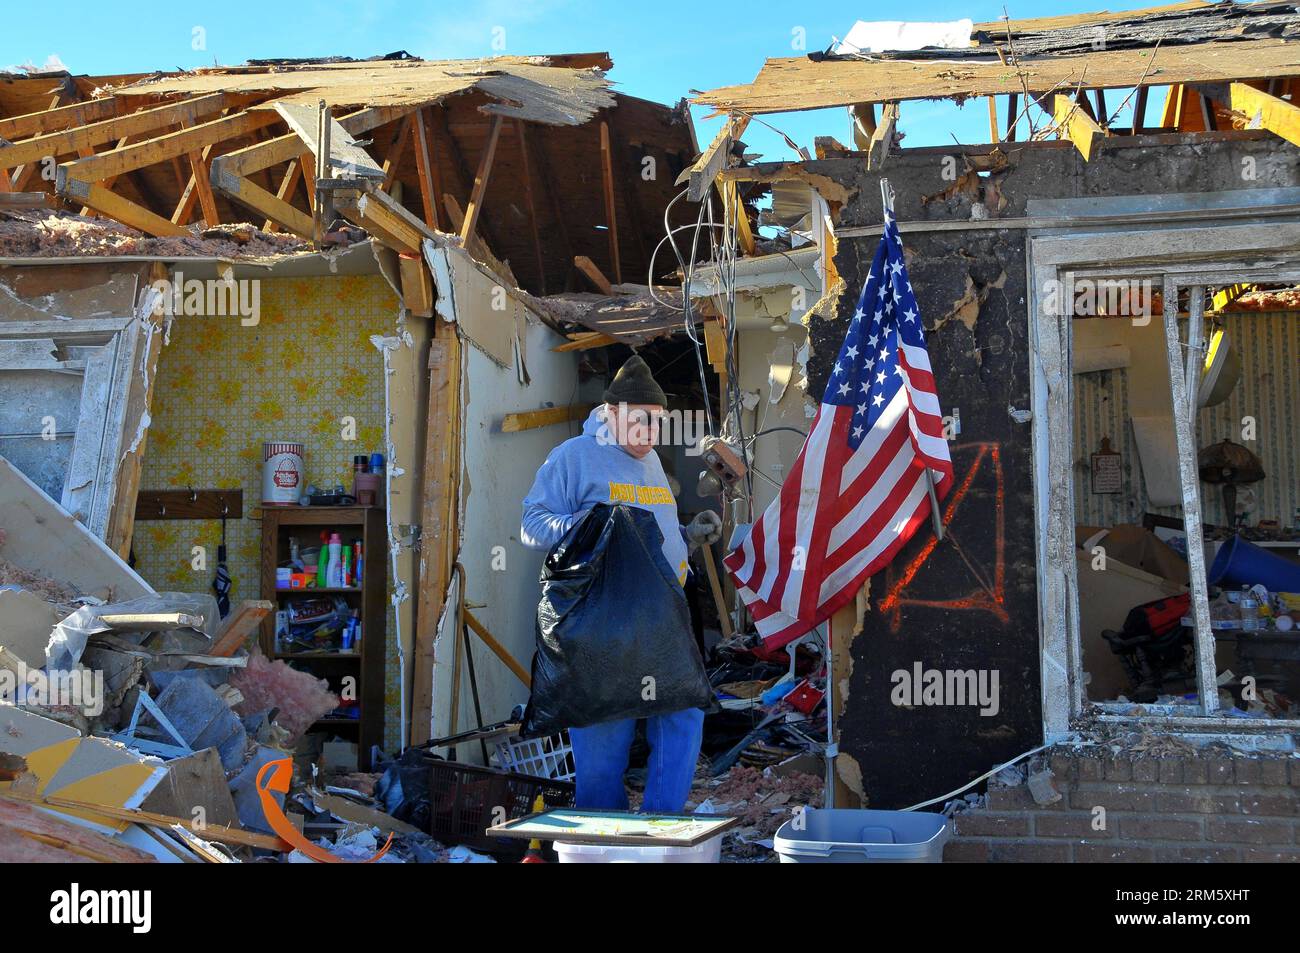 Bildnummer: 60732983  Datum: 19.11.2013  Copyright: imago/Xinhua ILLINOIS, Nov. 19, 2013 (Xinhua) -- A local resident works in ruins after a tornado attack in the town of Washington in Illinois, the United States, on Nov. 19, 2013. At least 16 were killed during tornado attacks on Sunday, according to the National Weather Service. (Xinhua/Zhang Baoping)(ybg) US-ILLINOIS-TORNADO PUBLICATIONxNOTxINxCHN Gesellschaft USA Naturkatastrophe x0x xsk 2013 quer Aufmacher premiumd     60732983 Date 19 11 2013 Copyright Imago XINHUA Illinois Nov 19 2013 XINHUA a Local Resident Works in Ruins After a Torna Stock Photo